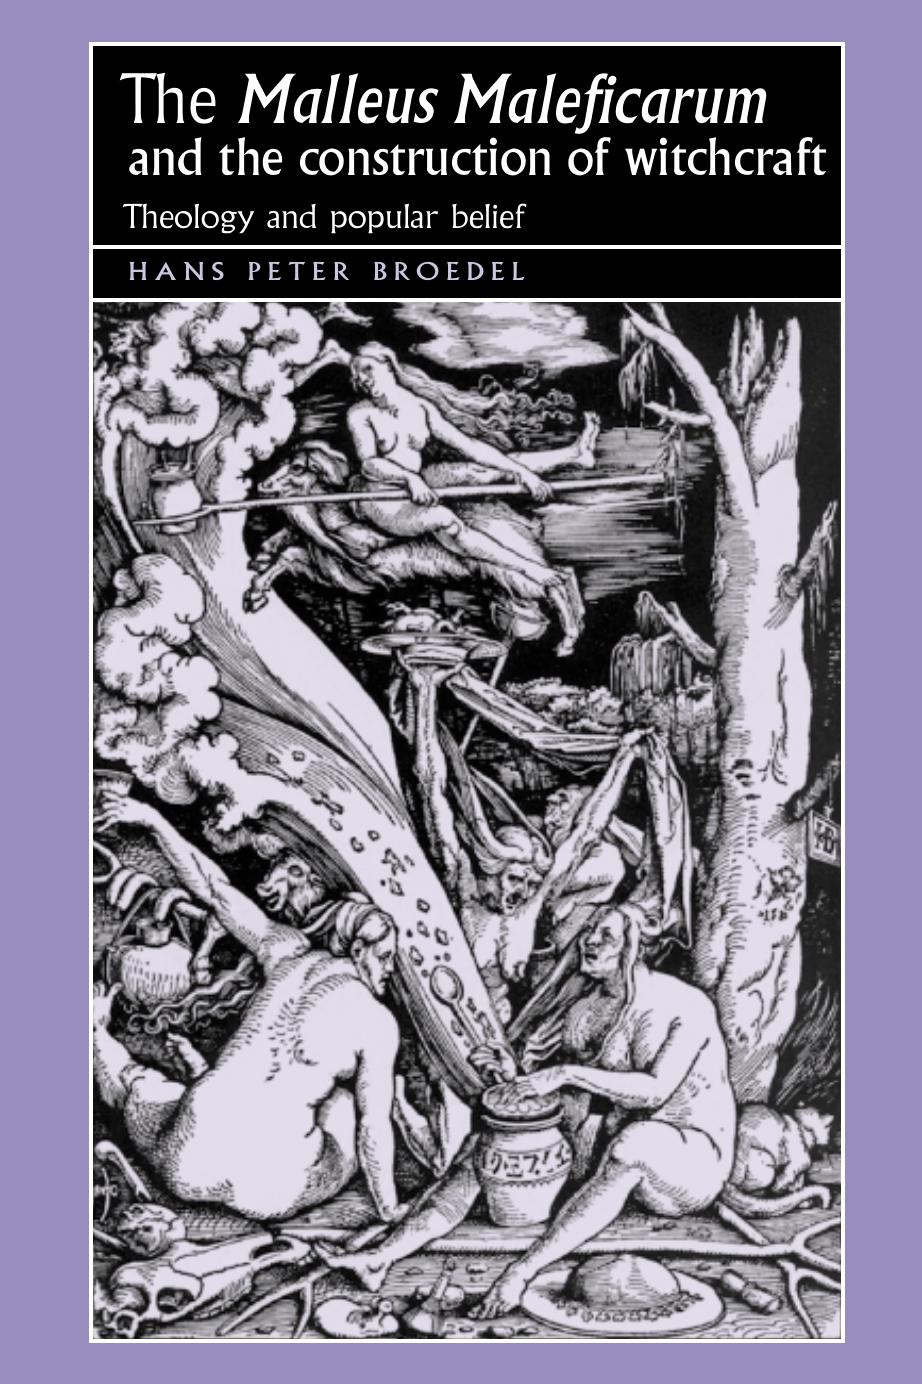 The Malleus Maleficarum and the Construction of Witchcraft: Theology and Popular Belief